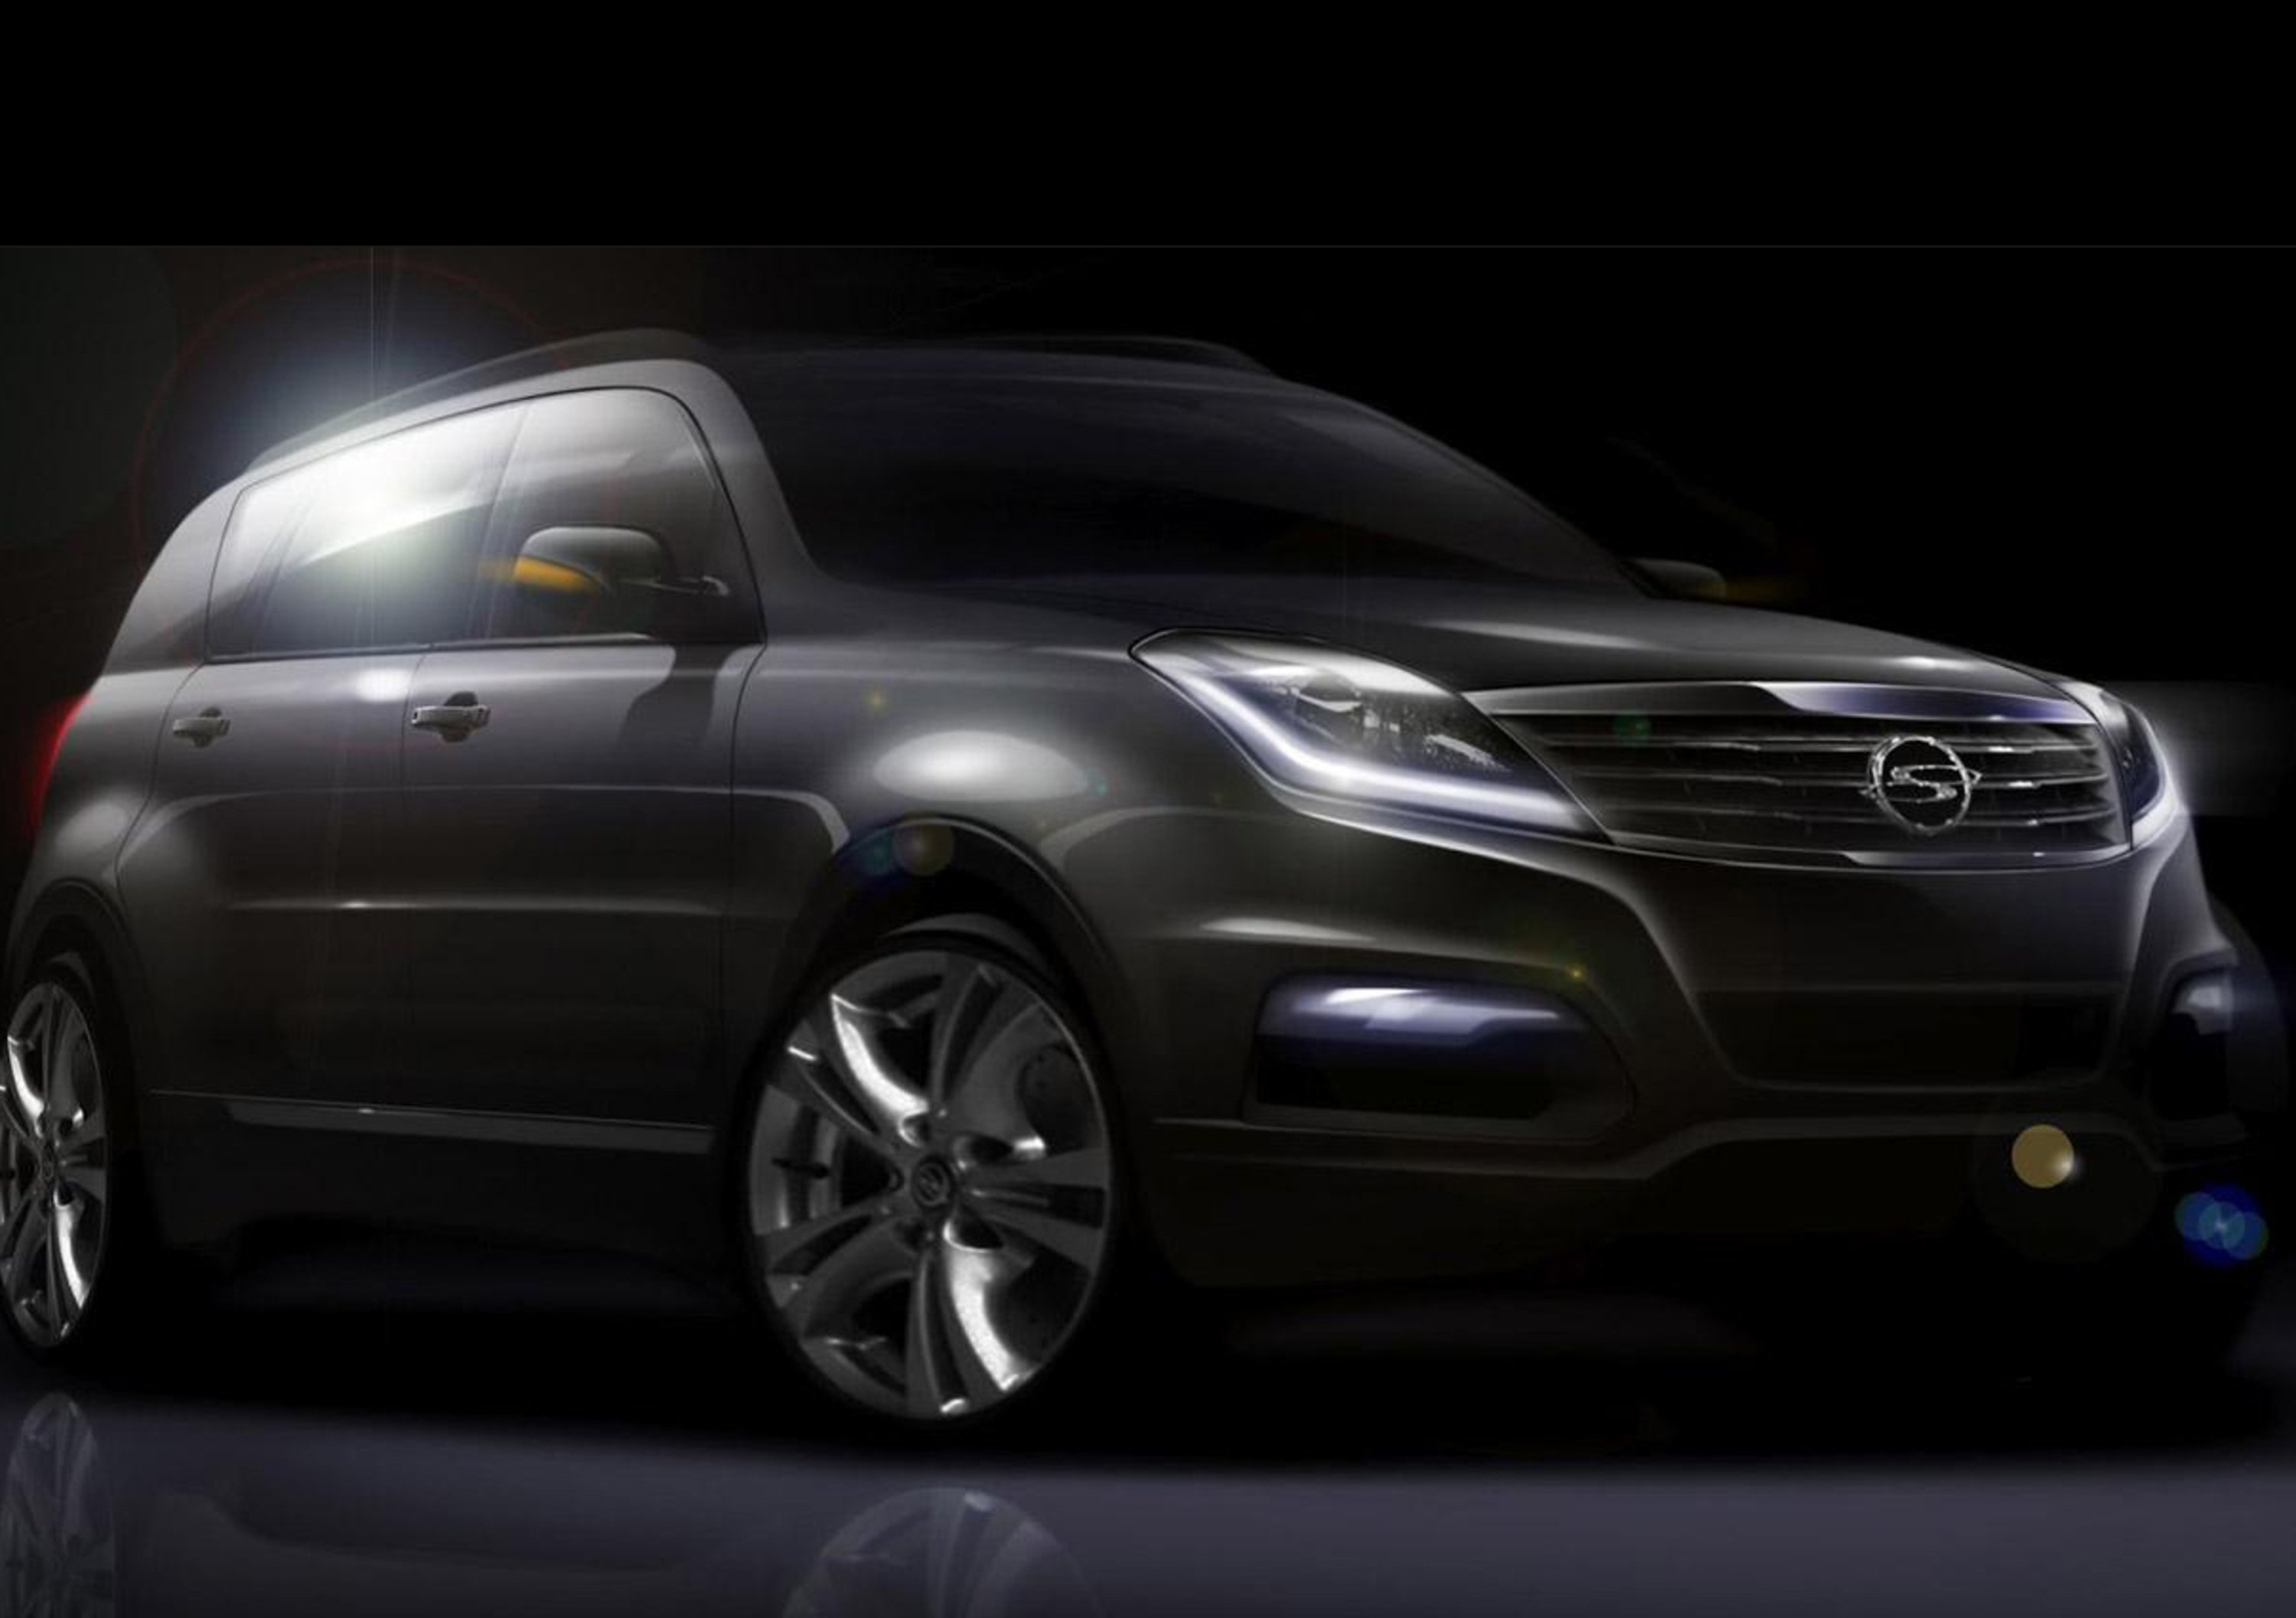 Nuova SsangYong Rexton: il teaser ufficiale